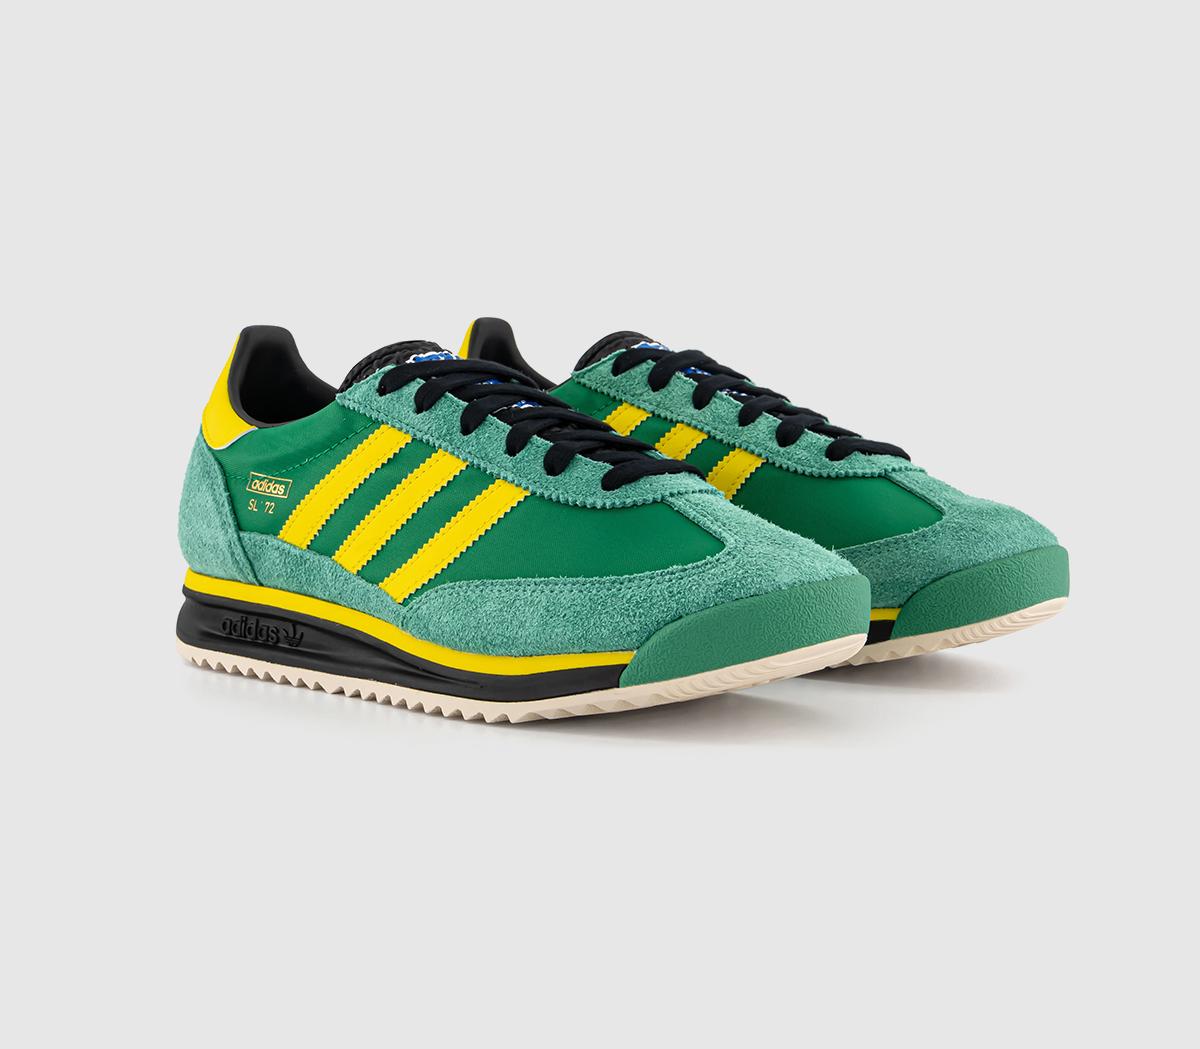 Adidas SL 72 RS Trainers Green Yellow, 7.5